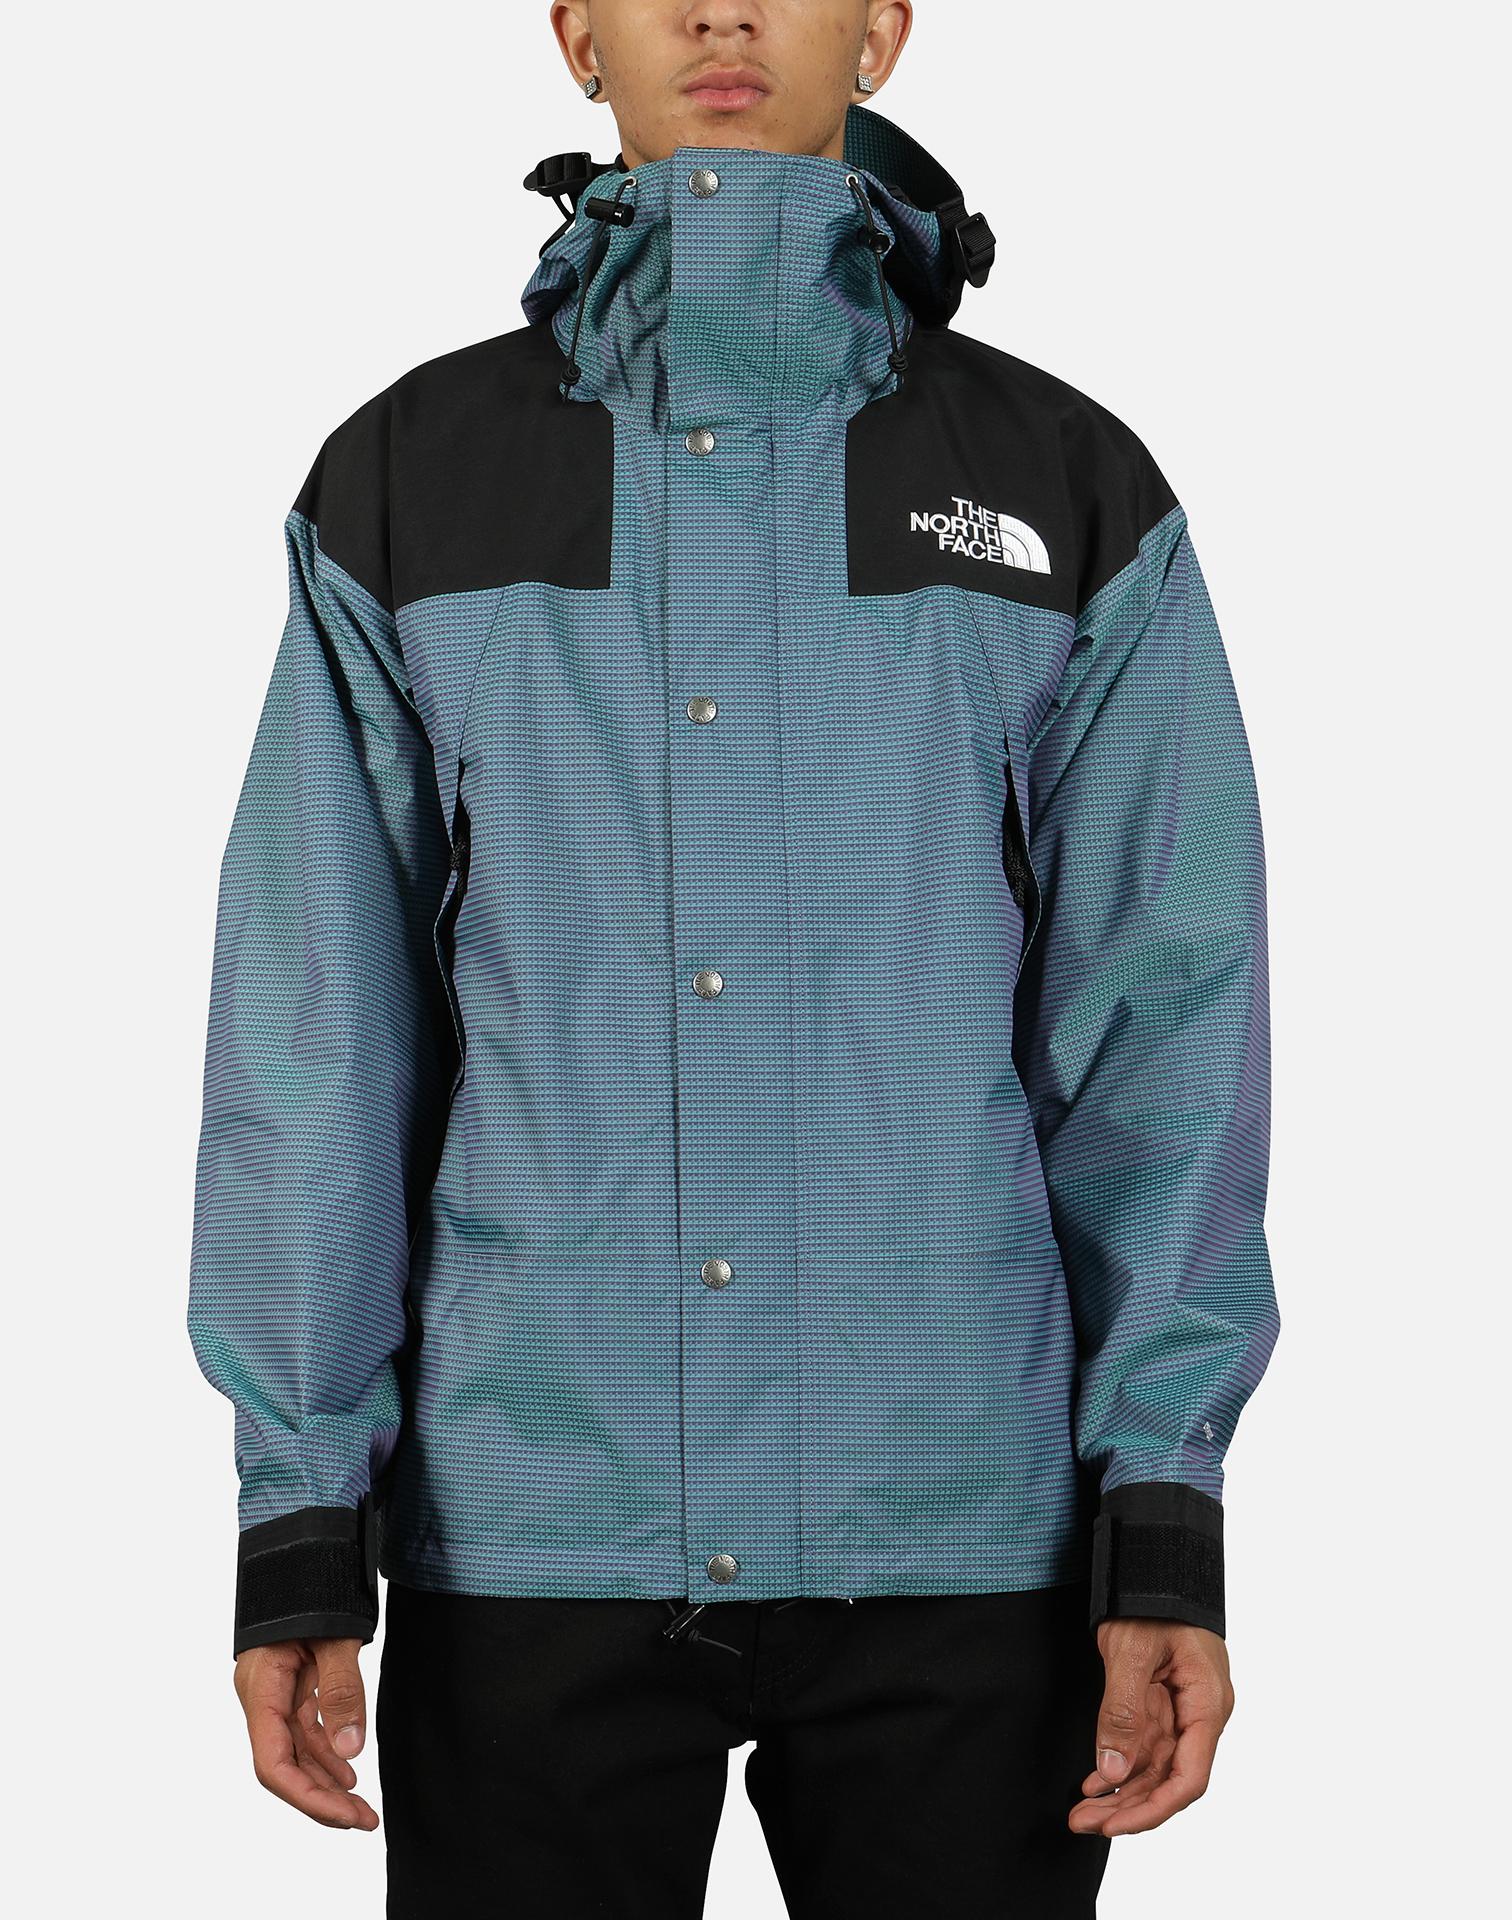 The North Face 1990 Mountain Jacket Gtx in Blue - Lyst